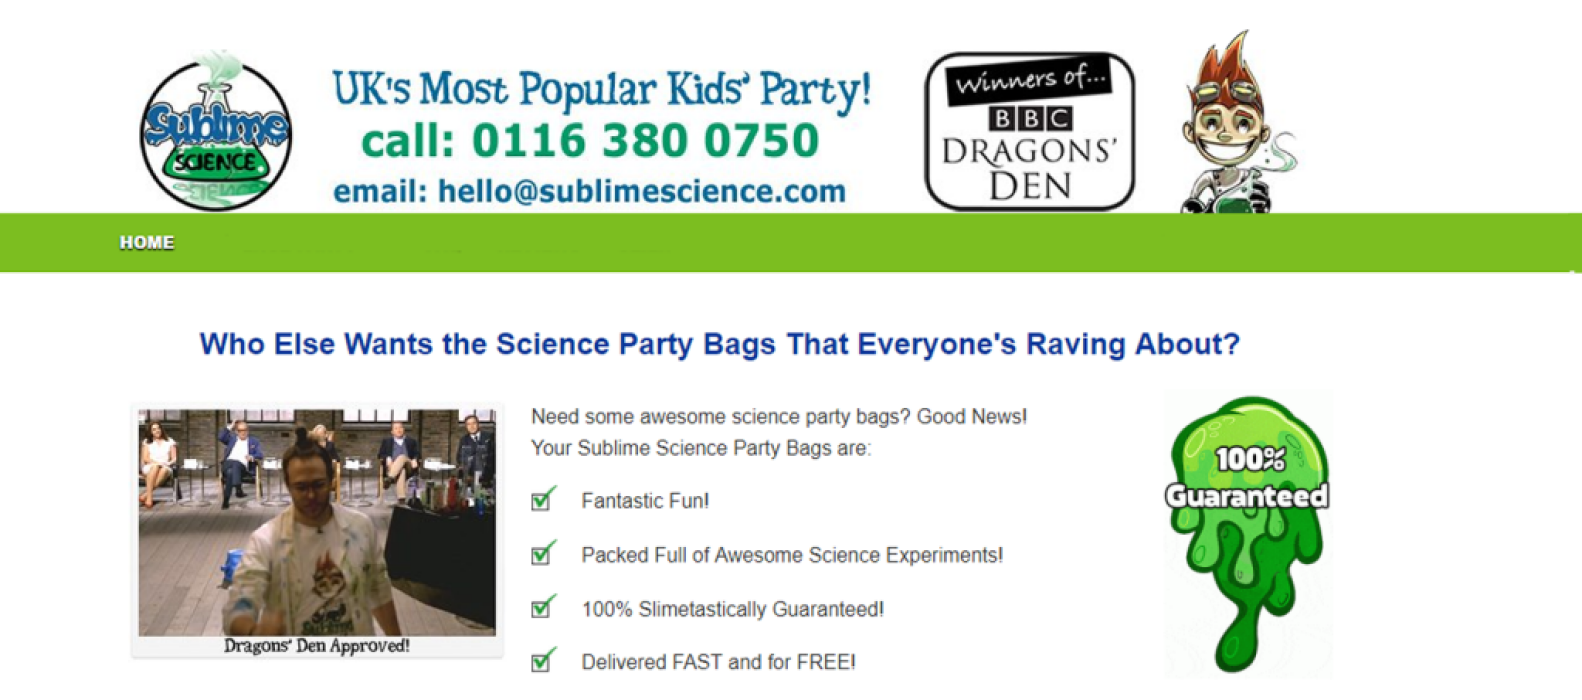 Sublime Science Party Bags